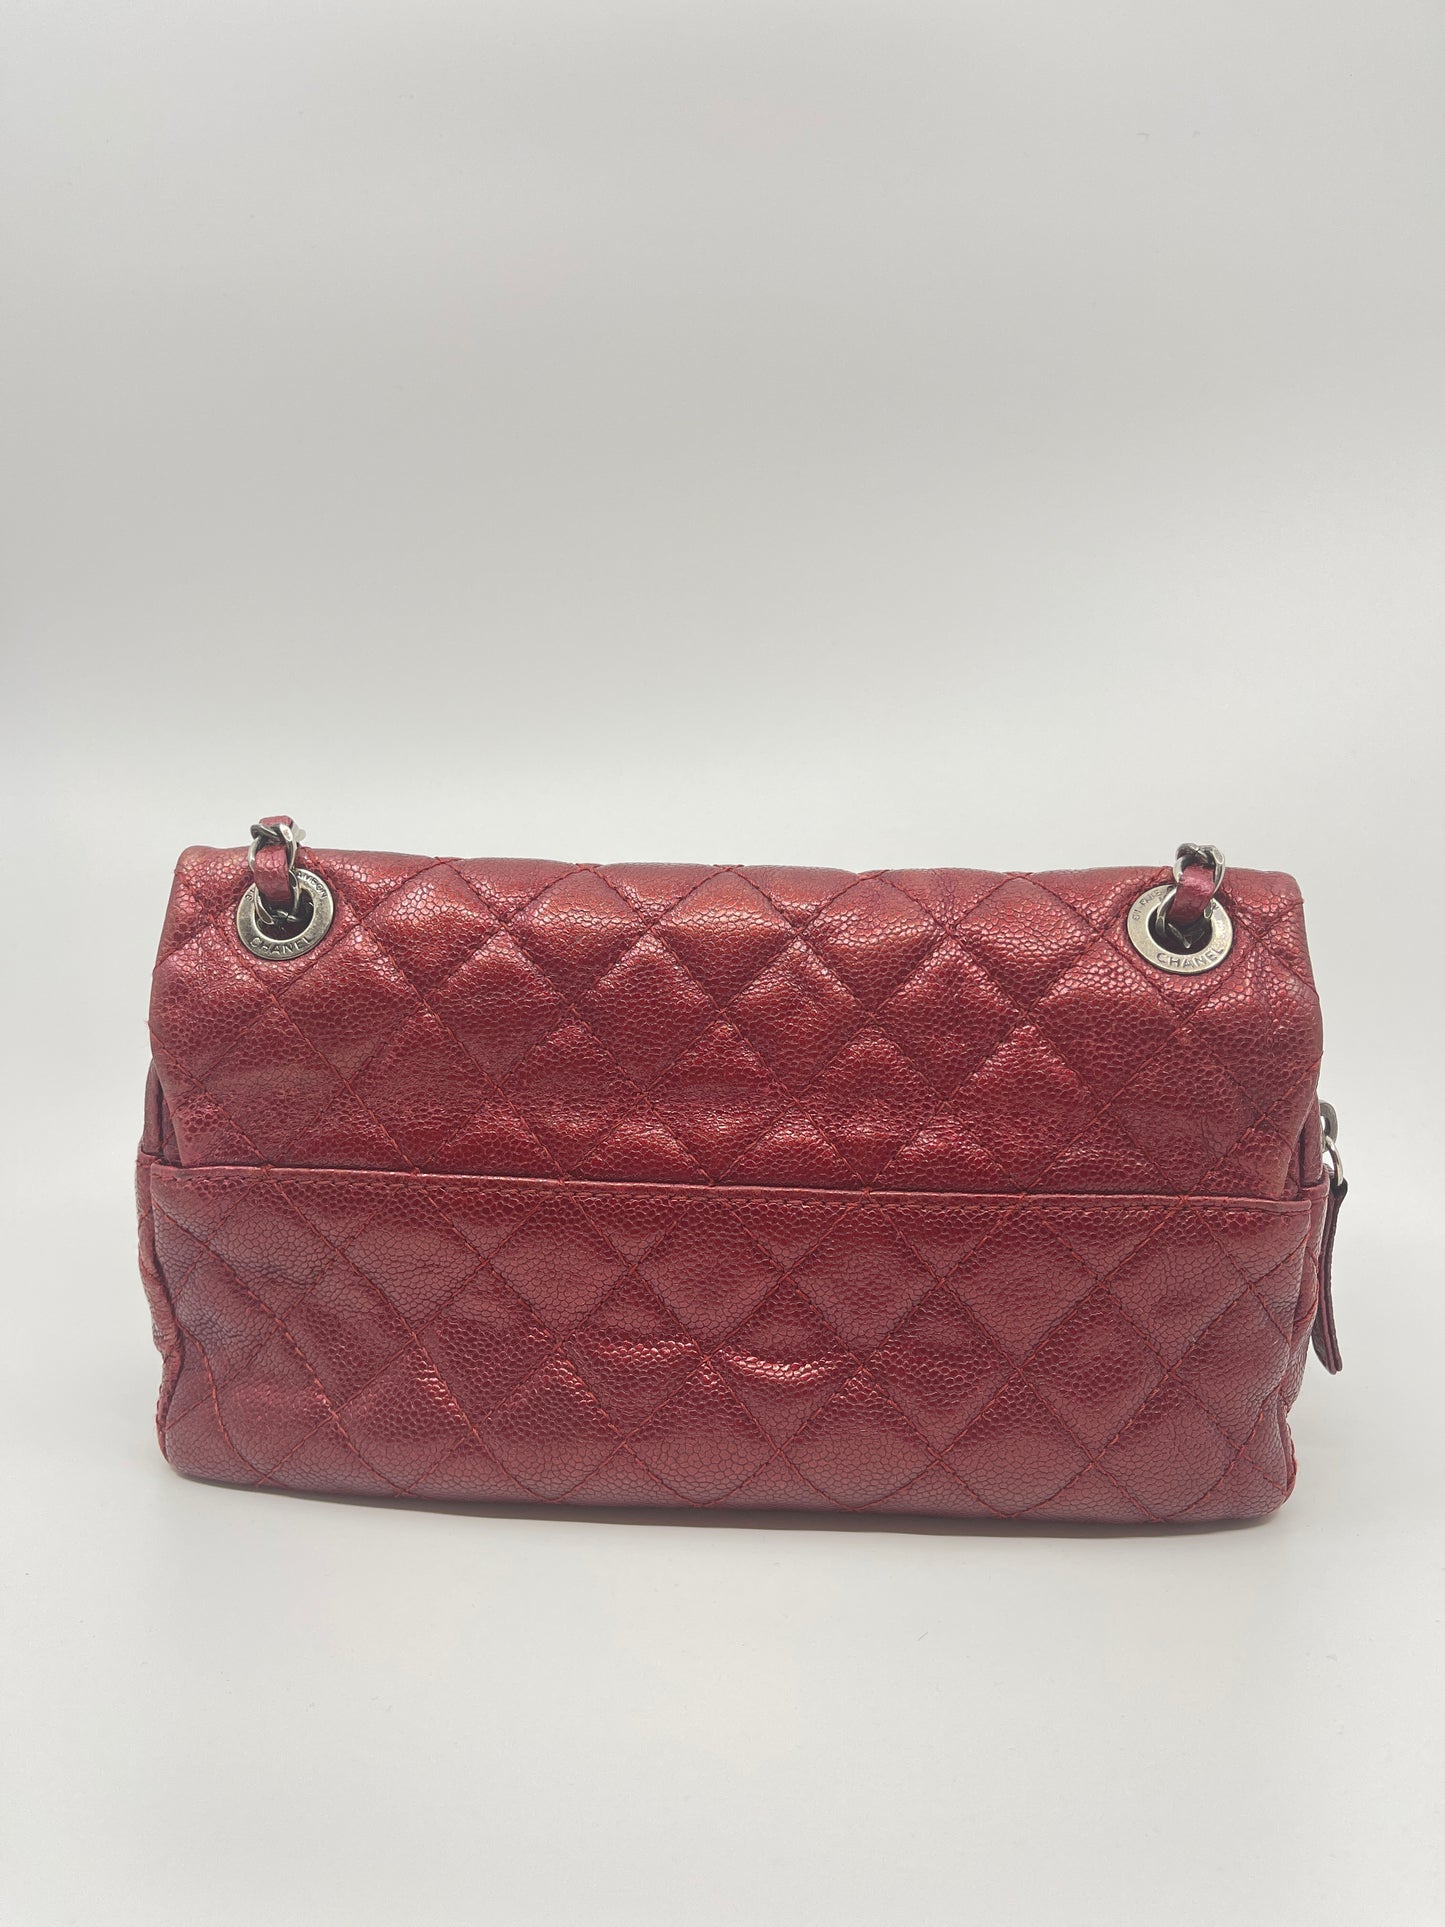 CHANEL CLASSIC EASY FLAP - CAVIAR LEATHER